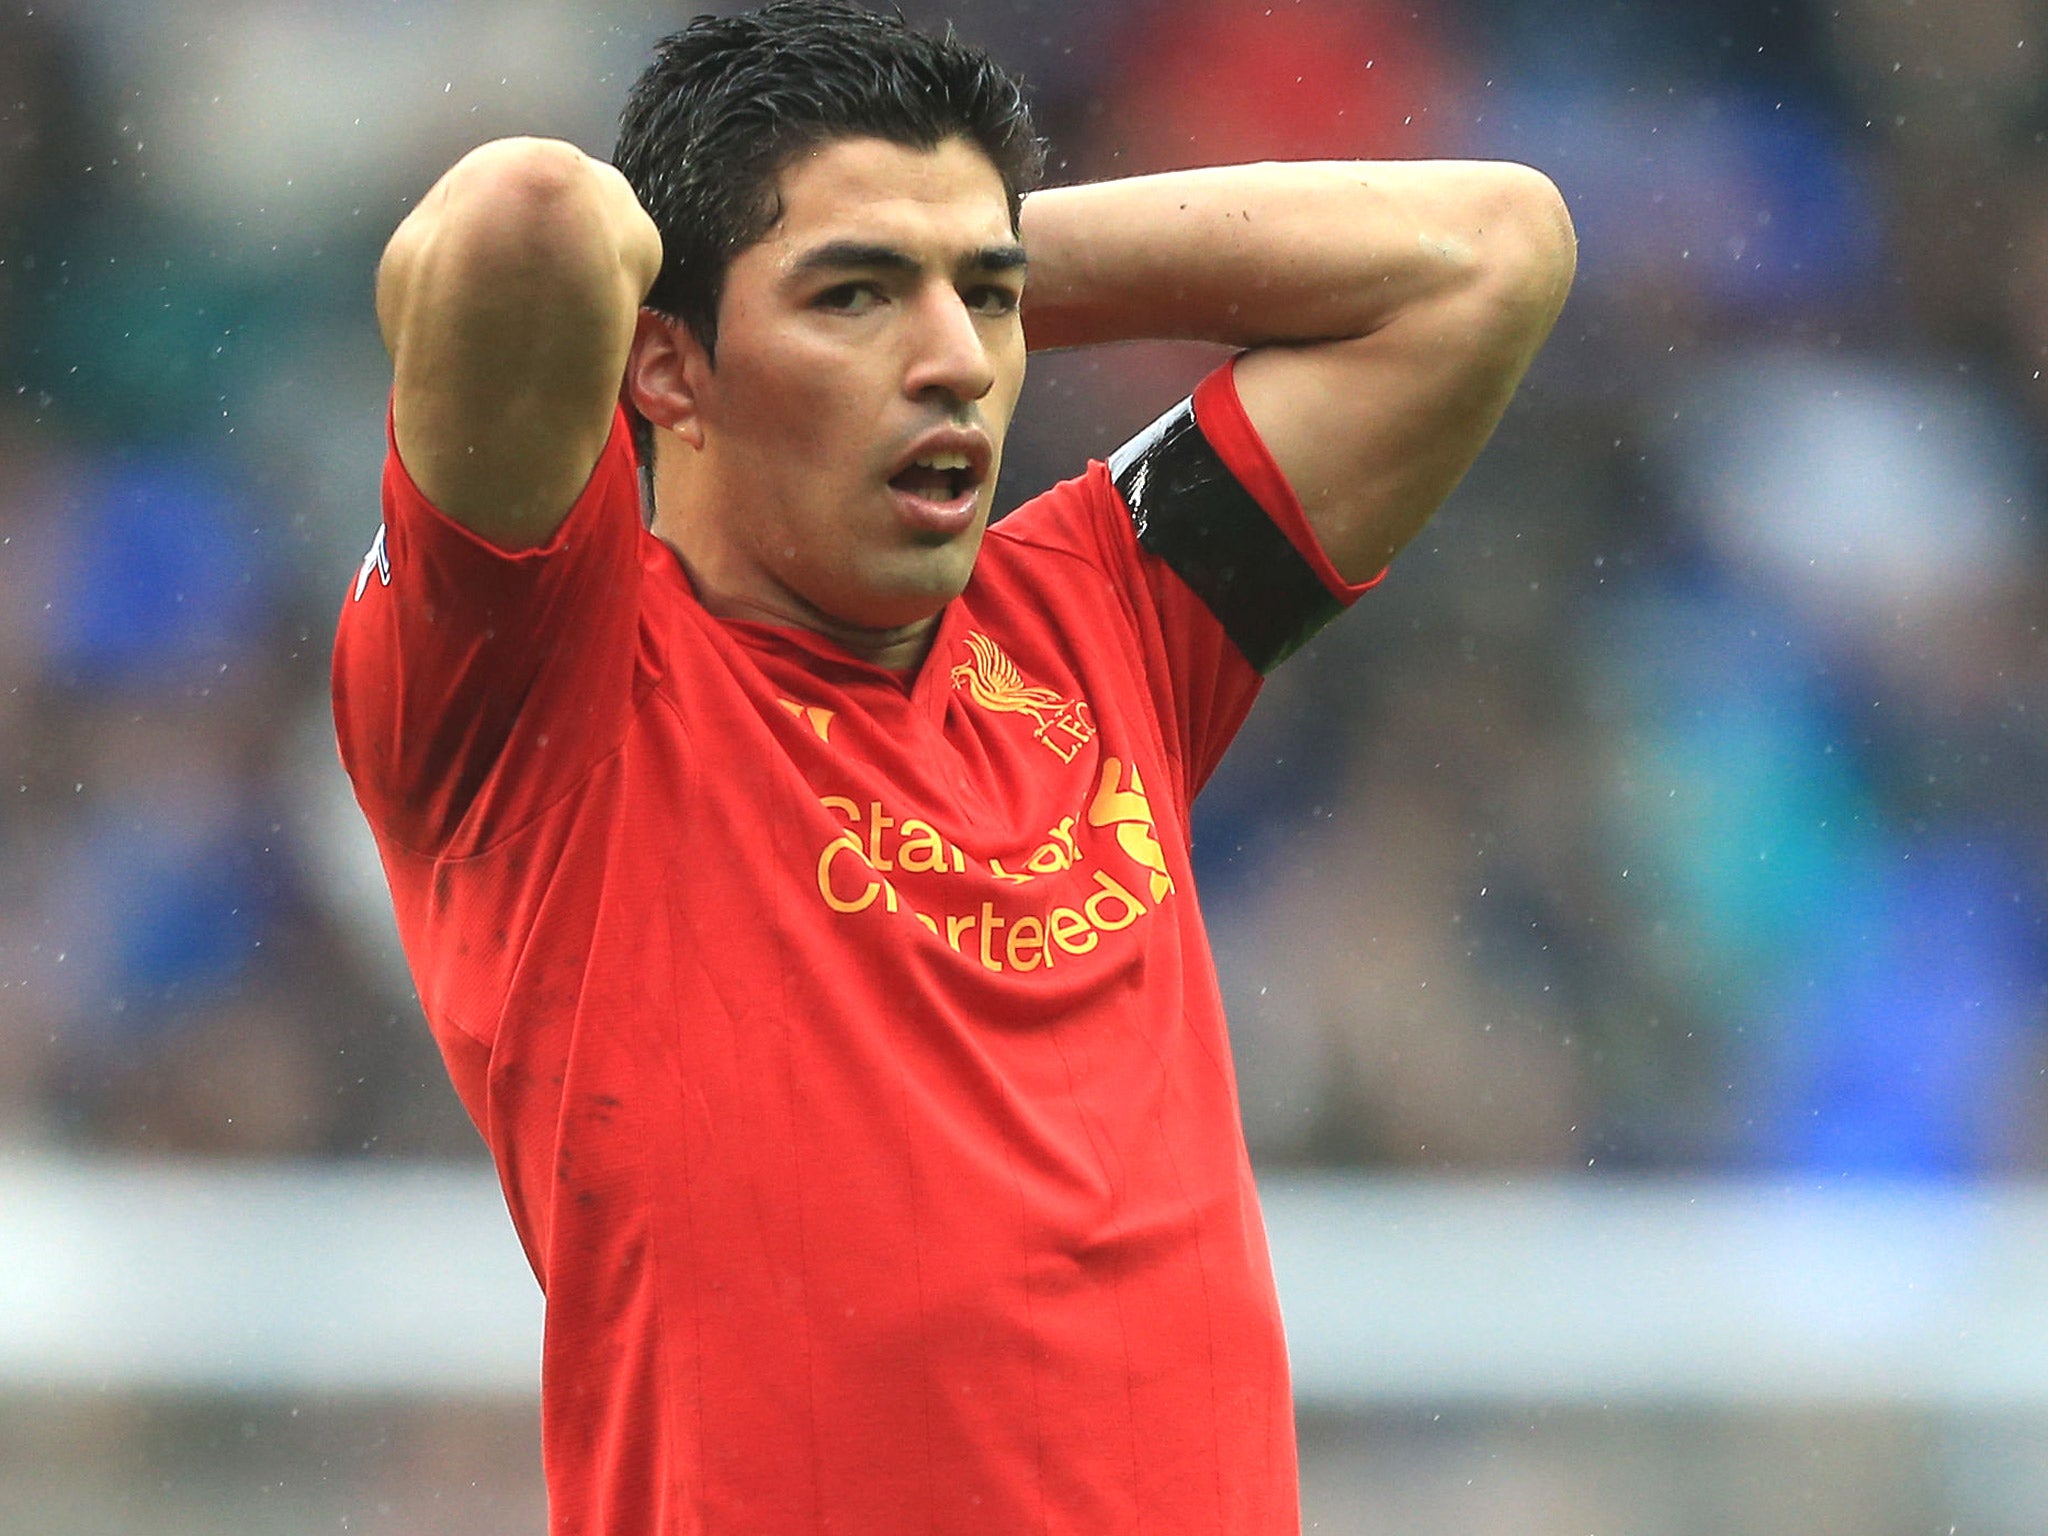 Luis Suarez has already been judged before any hearing